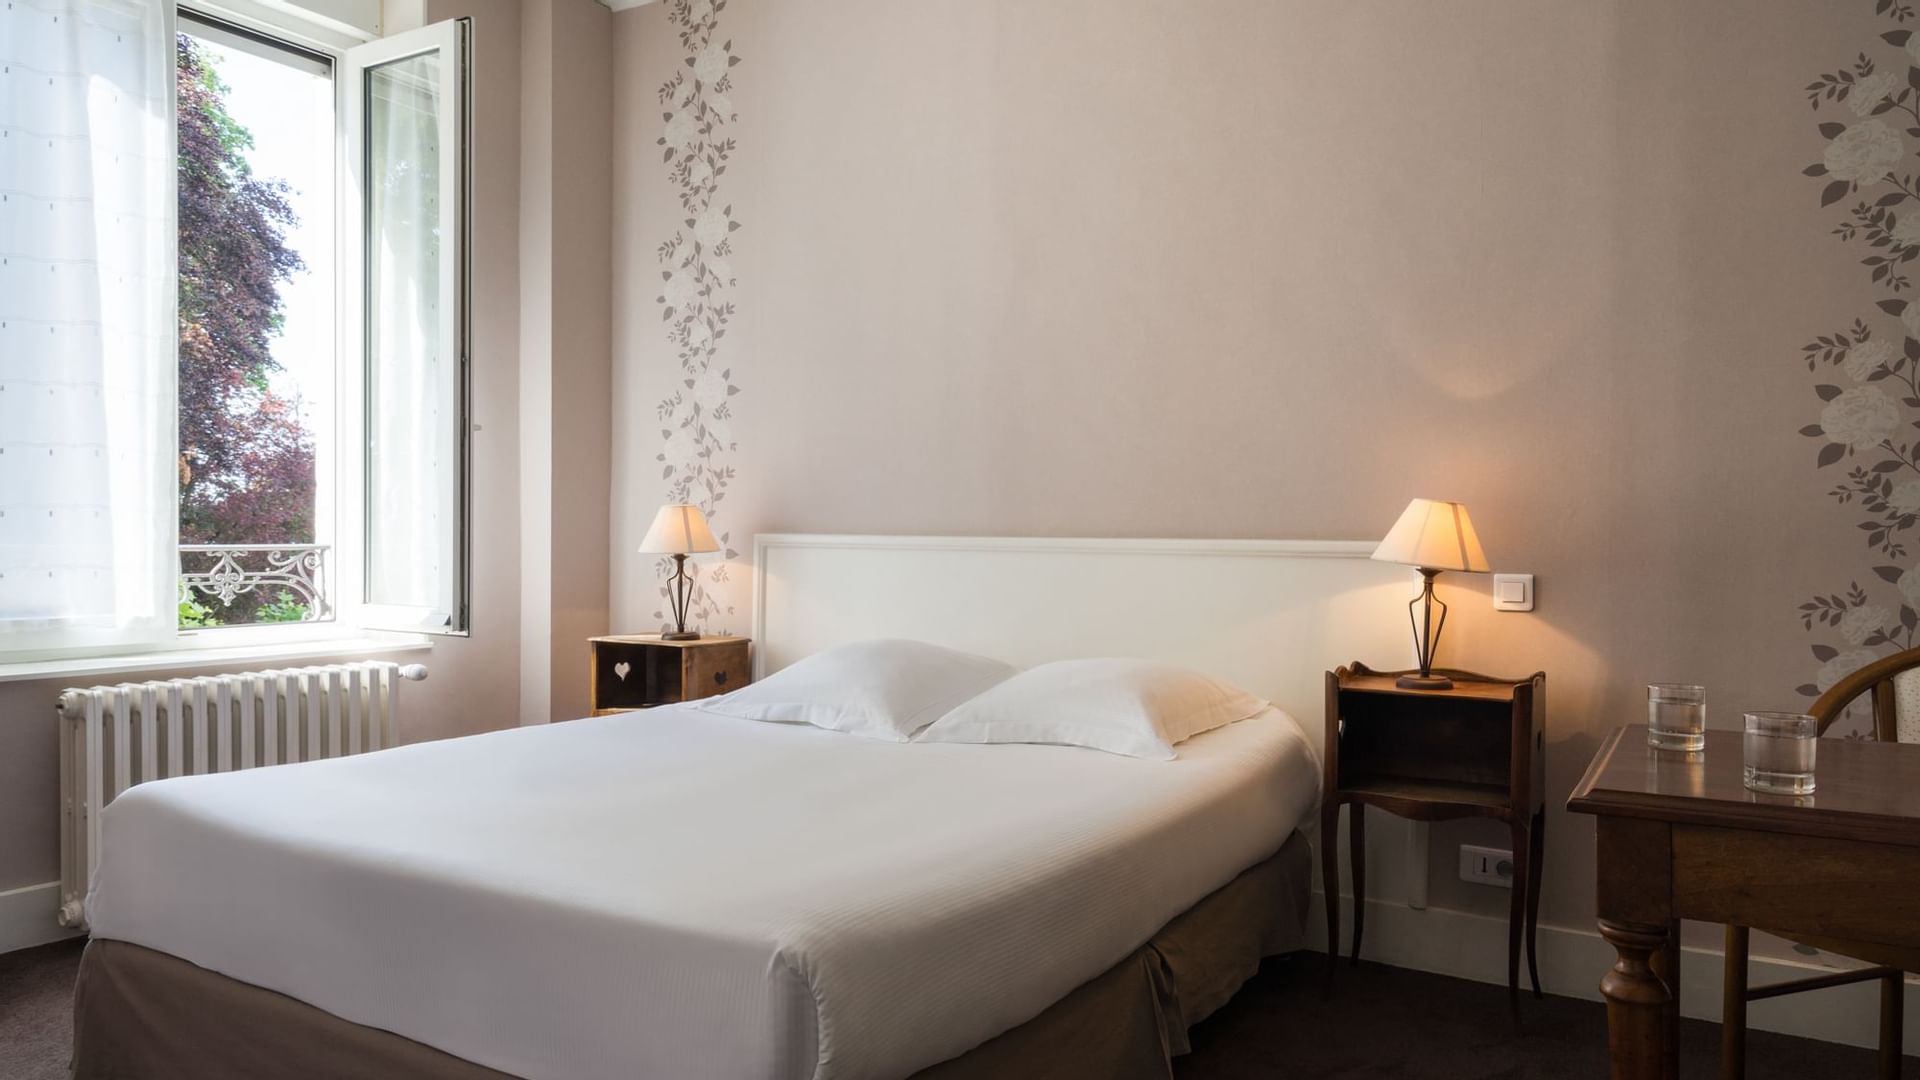 Double bed & bedside tables with lamps at Originals Hotels